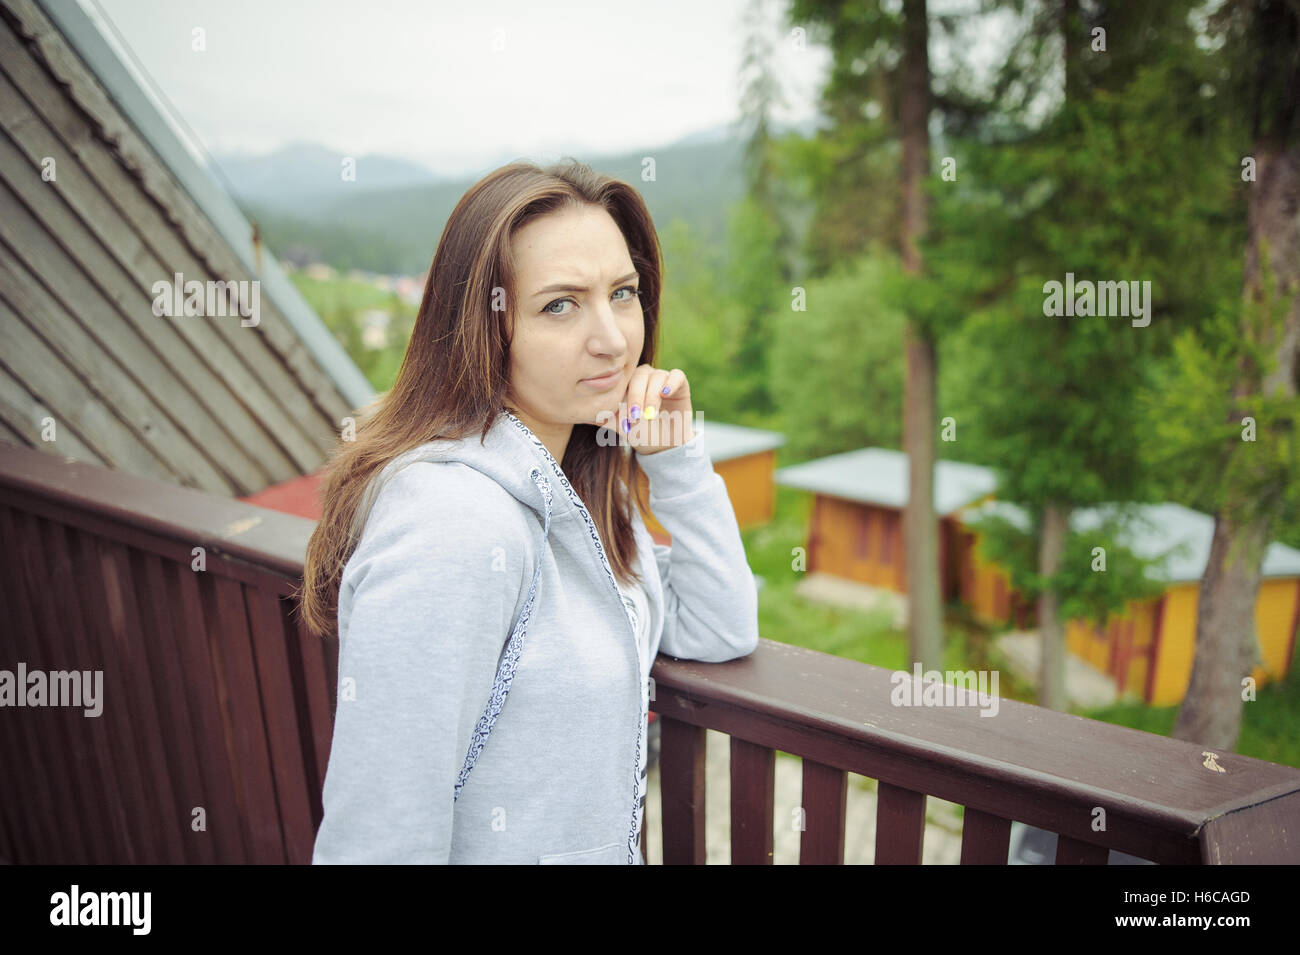 Belle brune teen girl with long hair leaning on railing. Banque D'Images